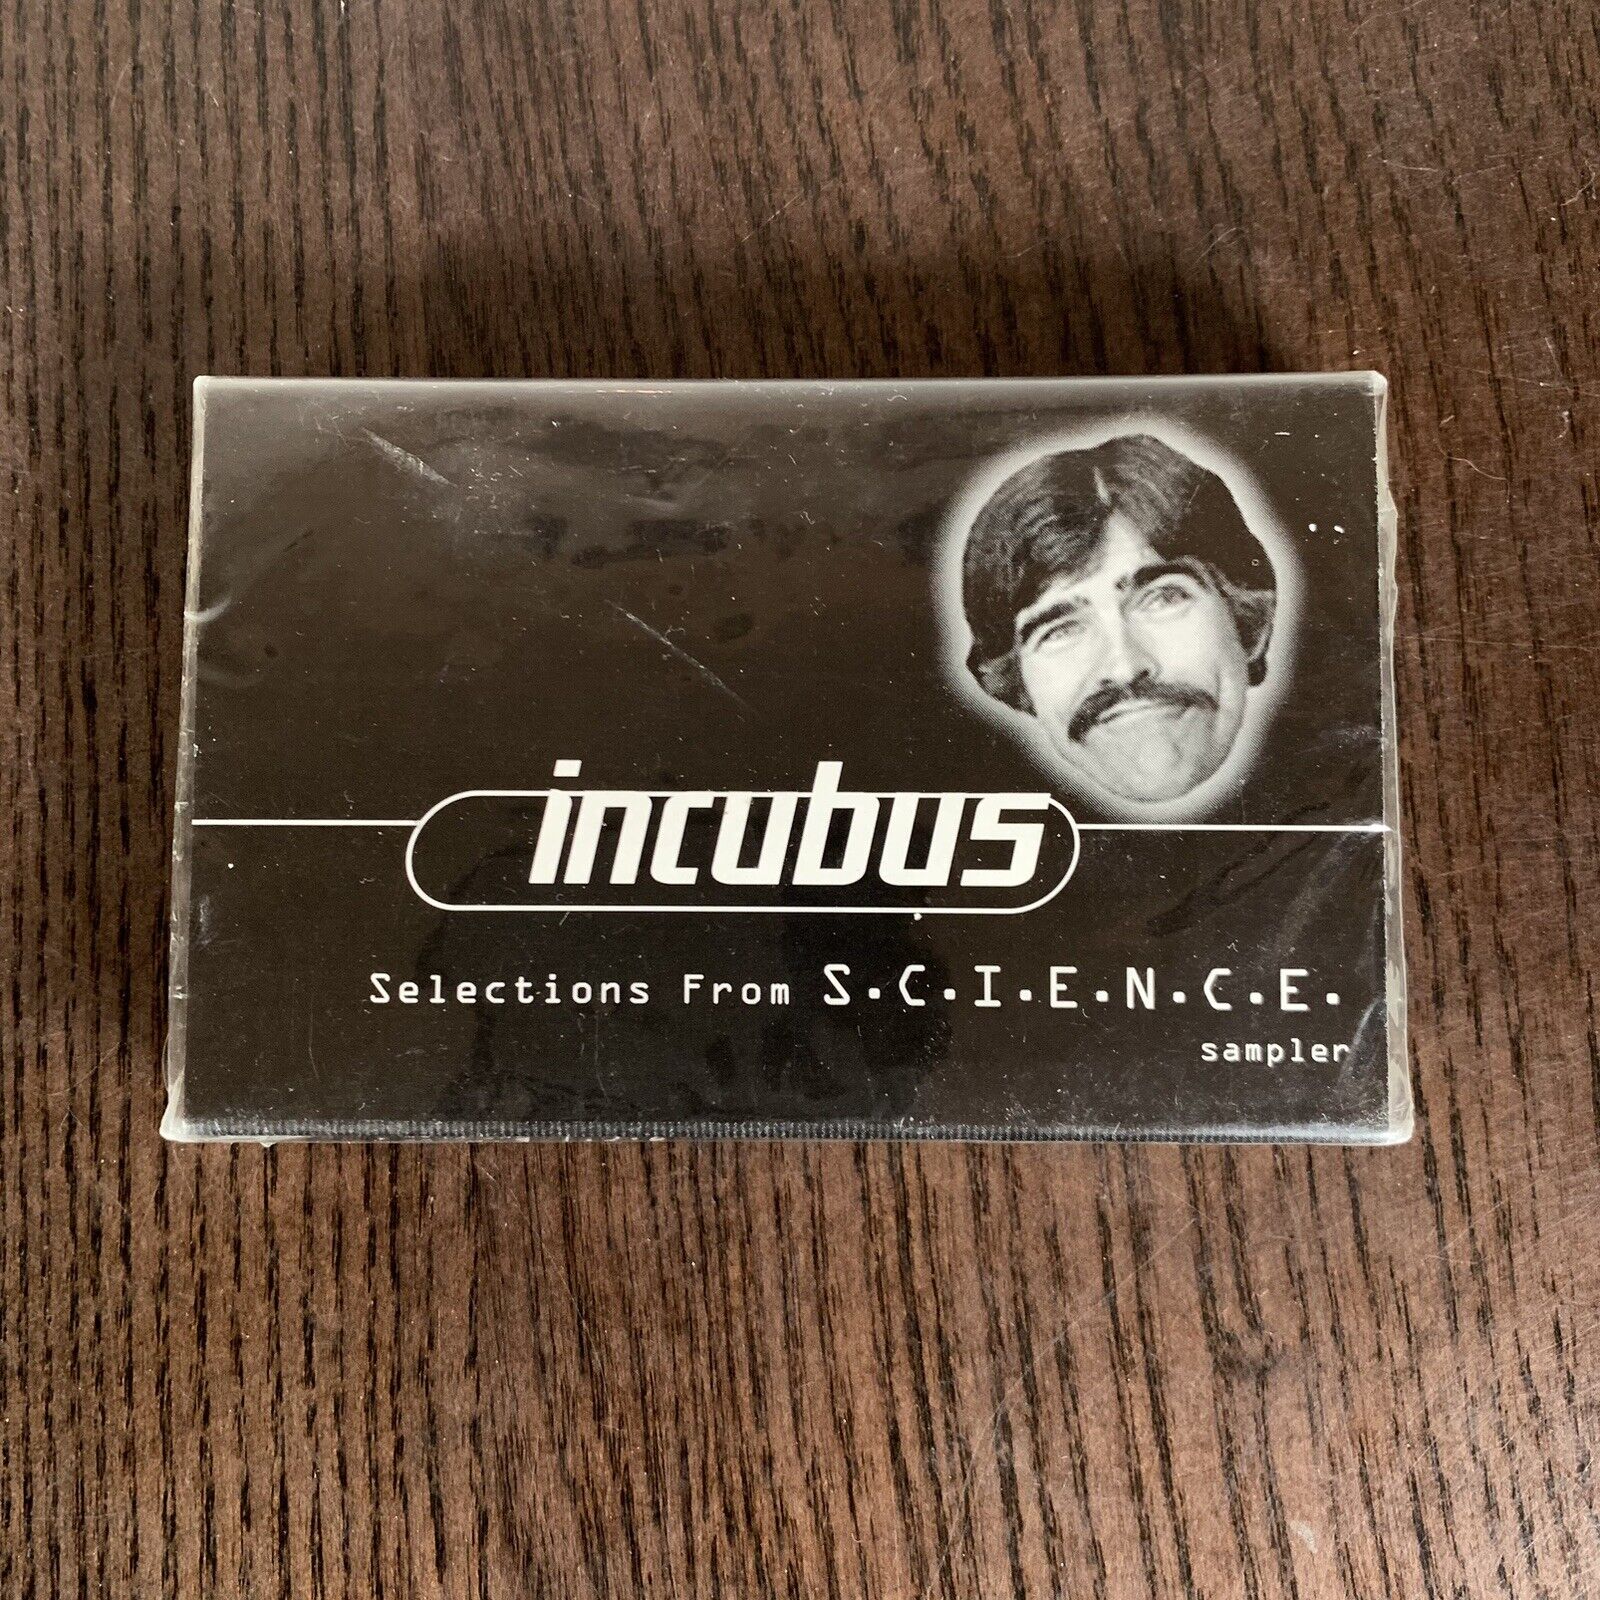 Incubus Redefine New Skin Selections from SCIENCE Cassette Tape New Sealed 1997